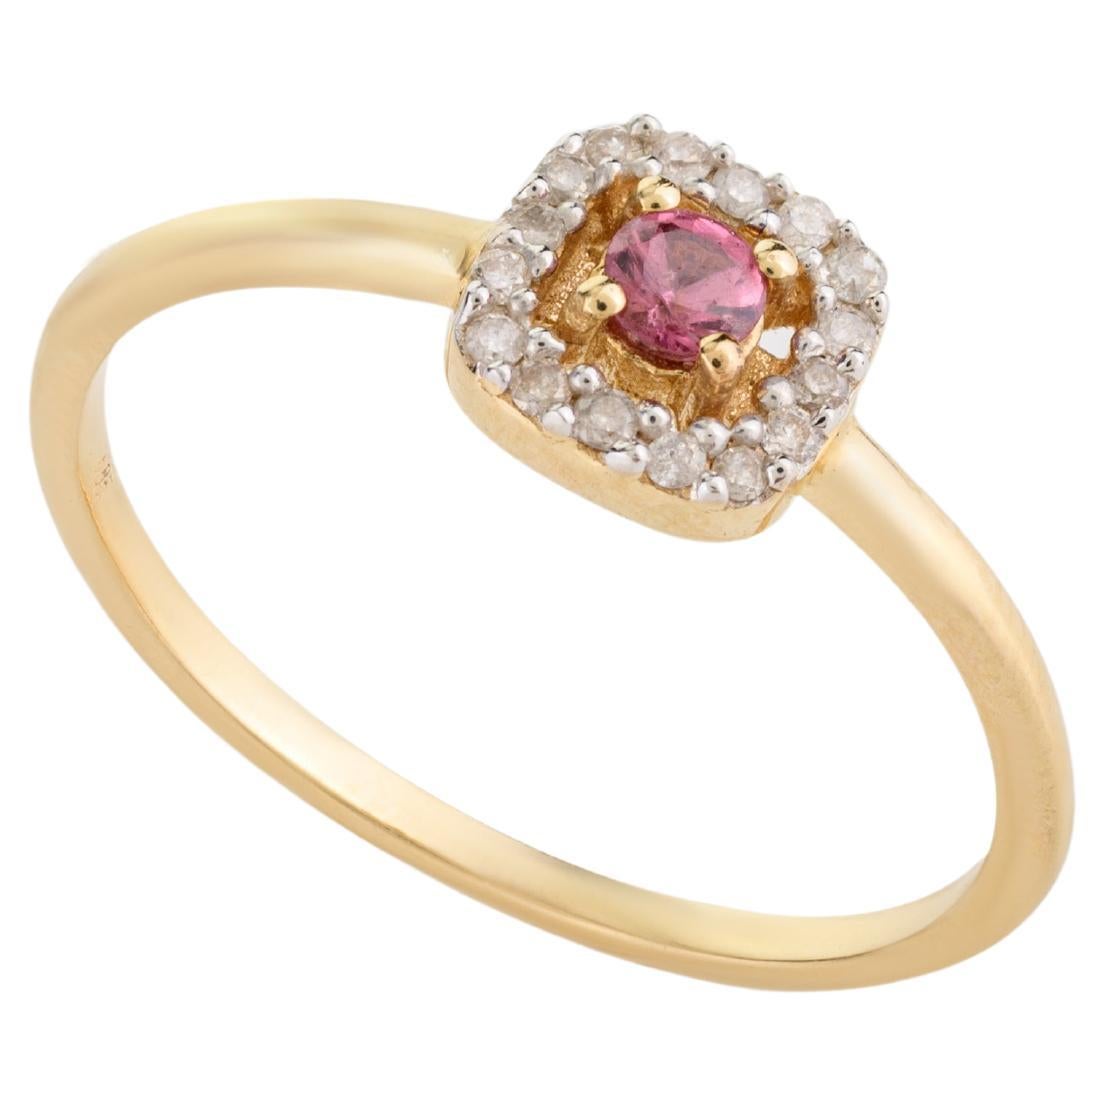 For Sale:  Dainty Pink Sapphire and Halo Diamond Ring Made in 14k Solid Yellow Gold